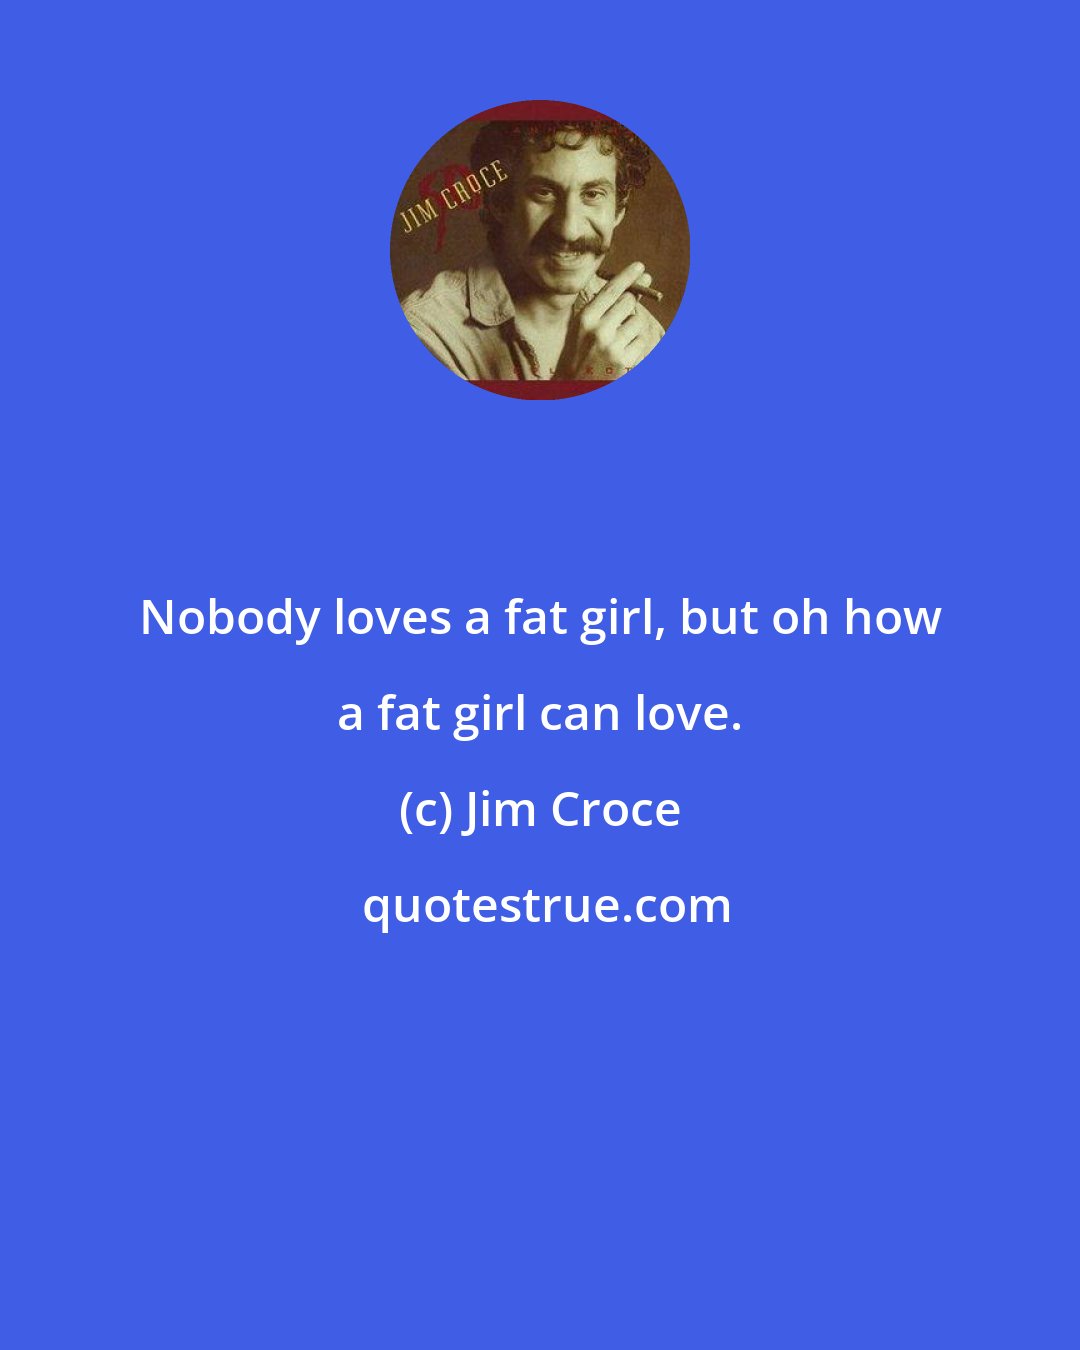 Jim Croce: Nobody loves a fat girl, but oh how a fat girl can love.